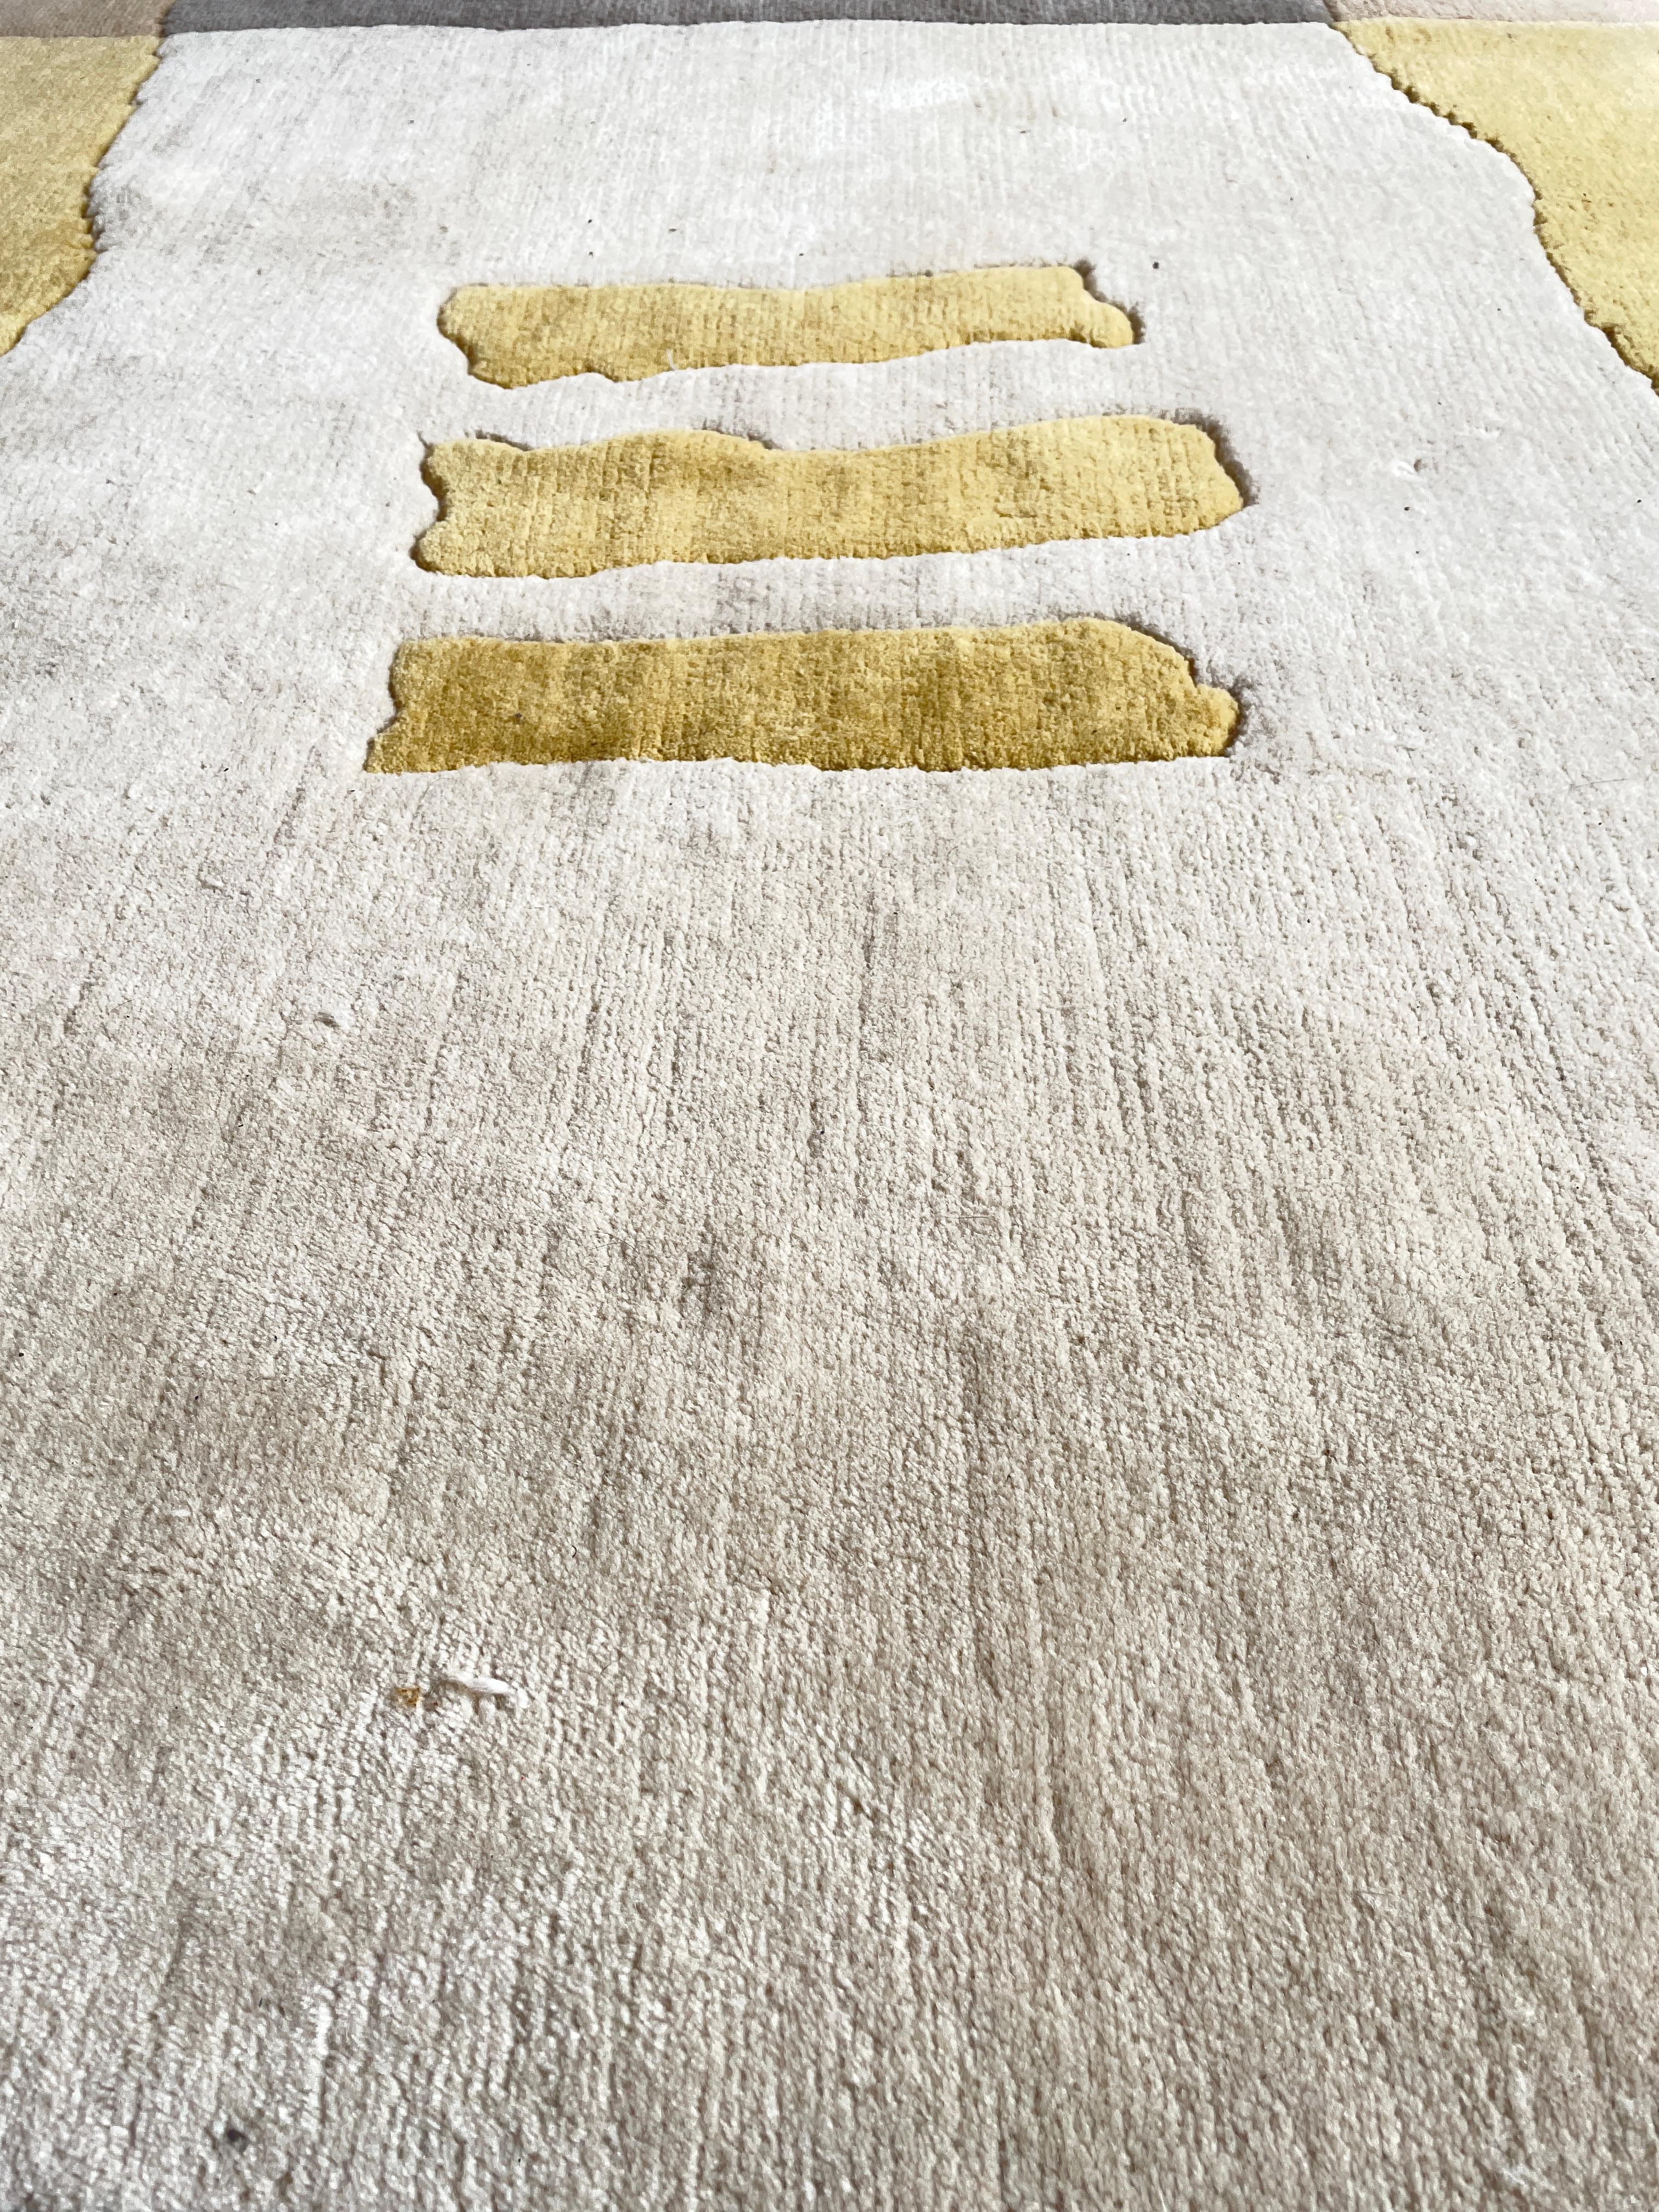 Rug by serge Lesage, 100% Wool from new Zealand , hand-knotted in India.

Serge LESAGE quickly established itself as one of the leaders in high-end contemporary carpets and custom-made carpets, recognized throughout the world.

Over the years,